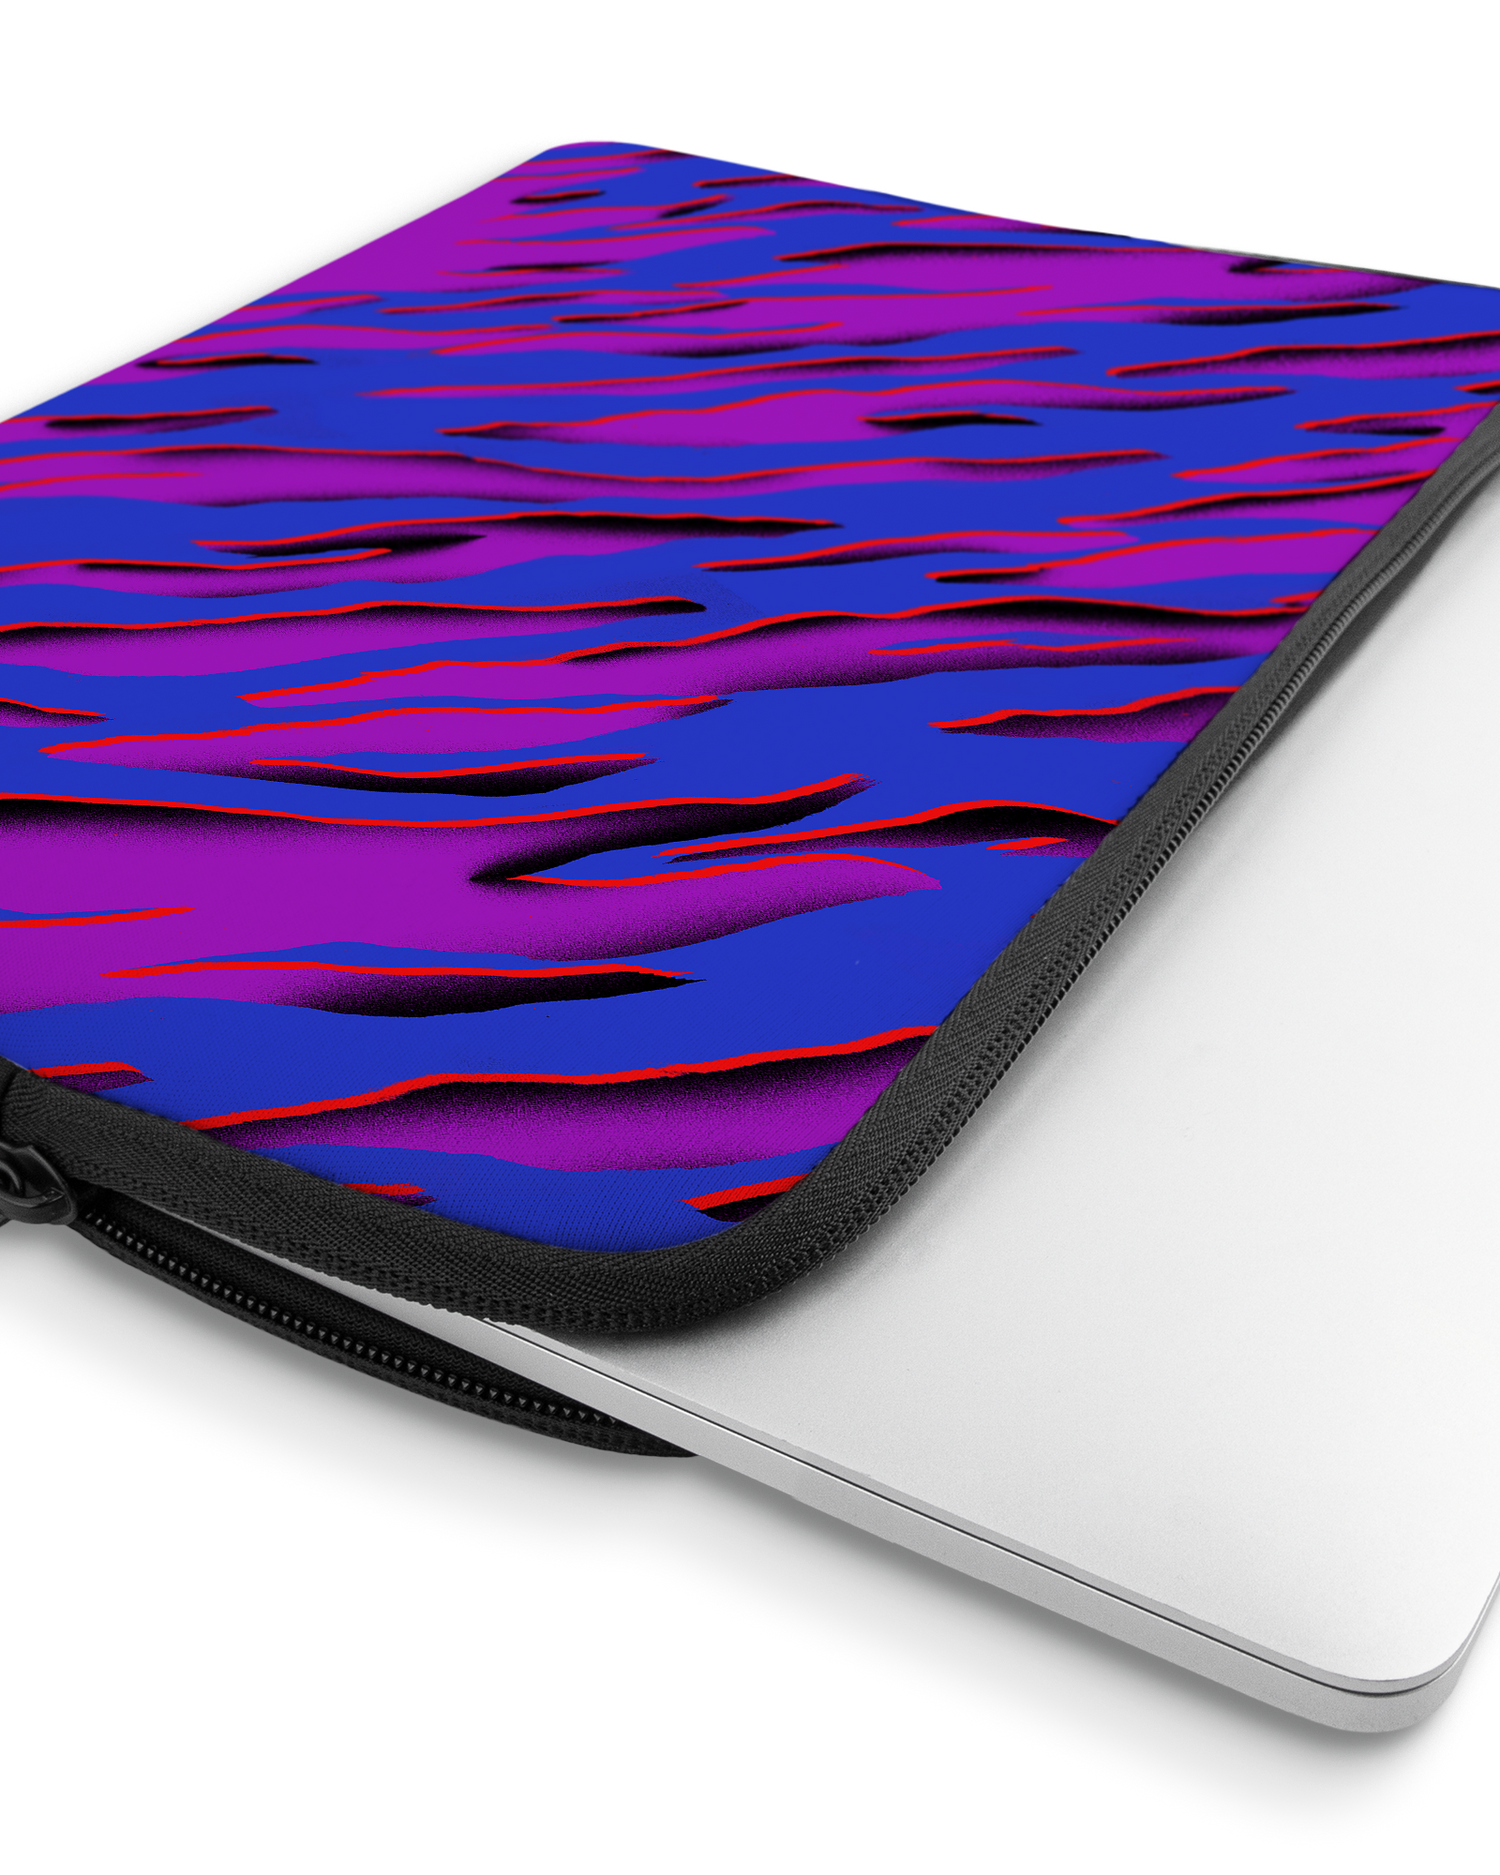 Electric Ocean 2 Laptop Case 13 inch with device inside